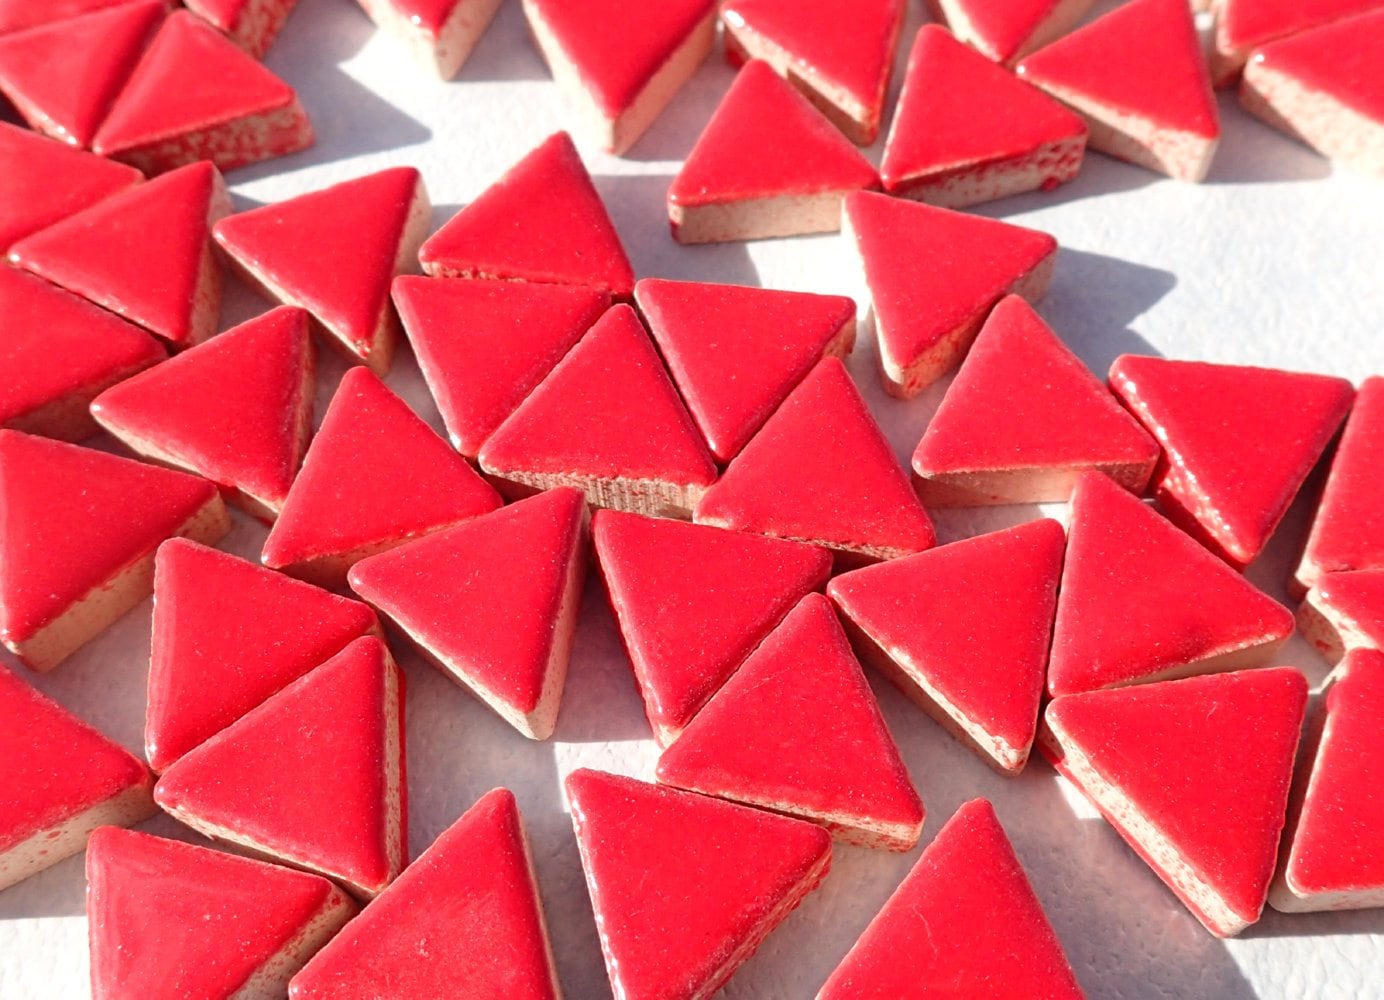 Bright Red Mini Triangles Mosaic Tiles - 50g Ceramic - 15mm in Lipstick Red